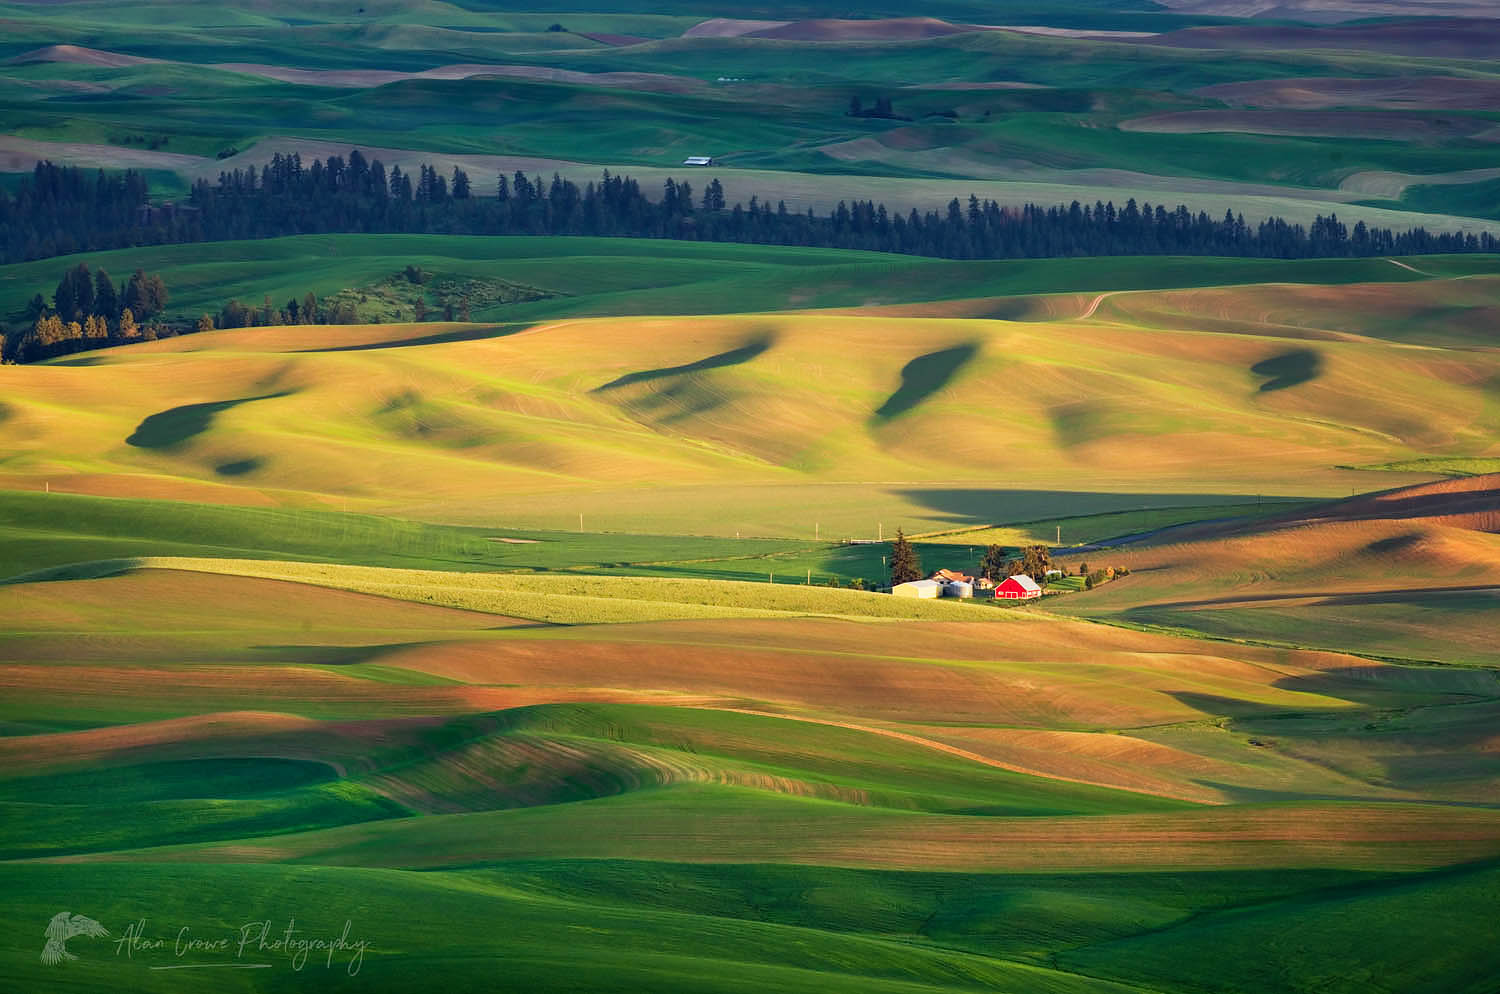 Rolling hills of green wheat fields seen from Steptoe Butte, the Palouse region of the Inland Empire of Washington #51649